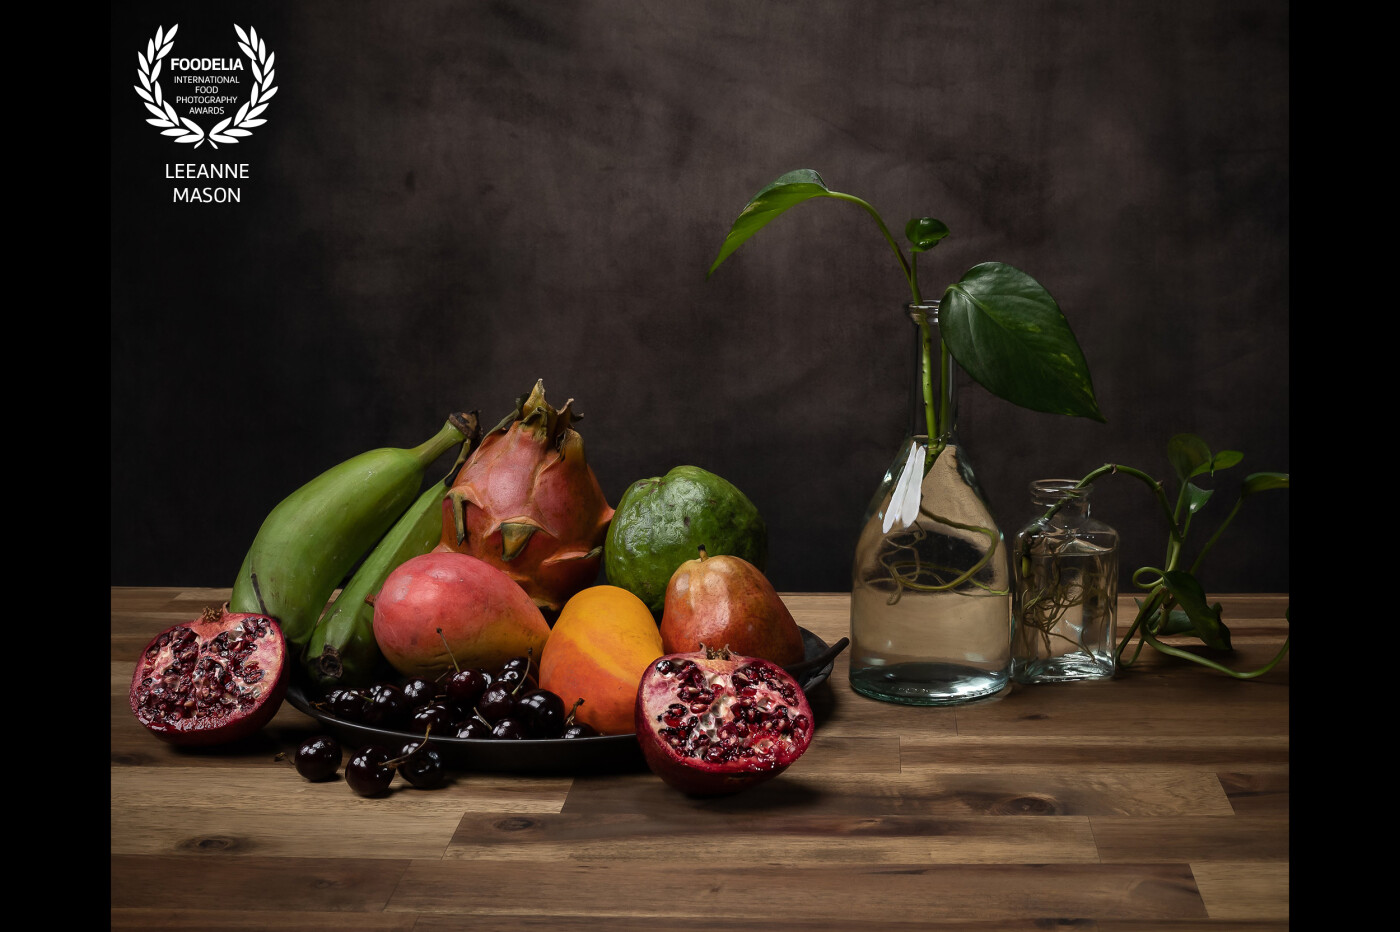 I wanted to do a still life of these tropical fruits in an old masters style and used multiple exposures composited together to get a painterly feel.